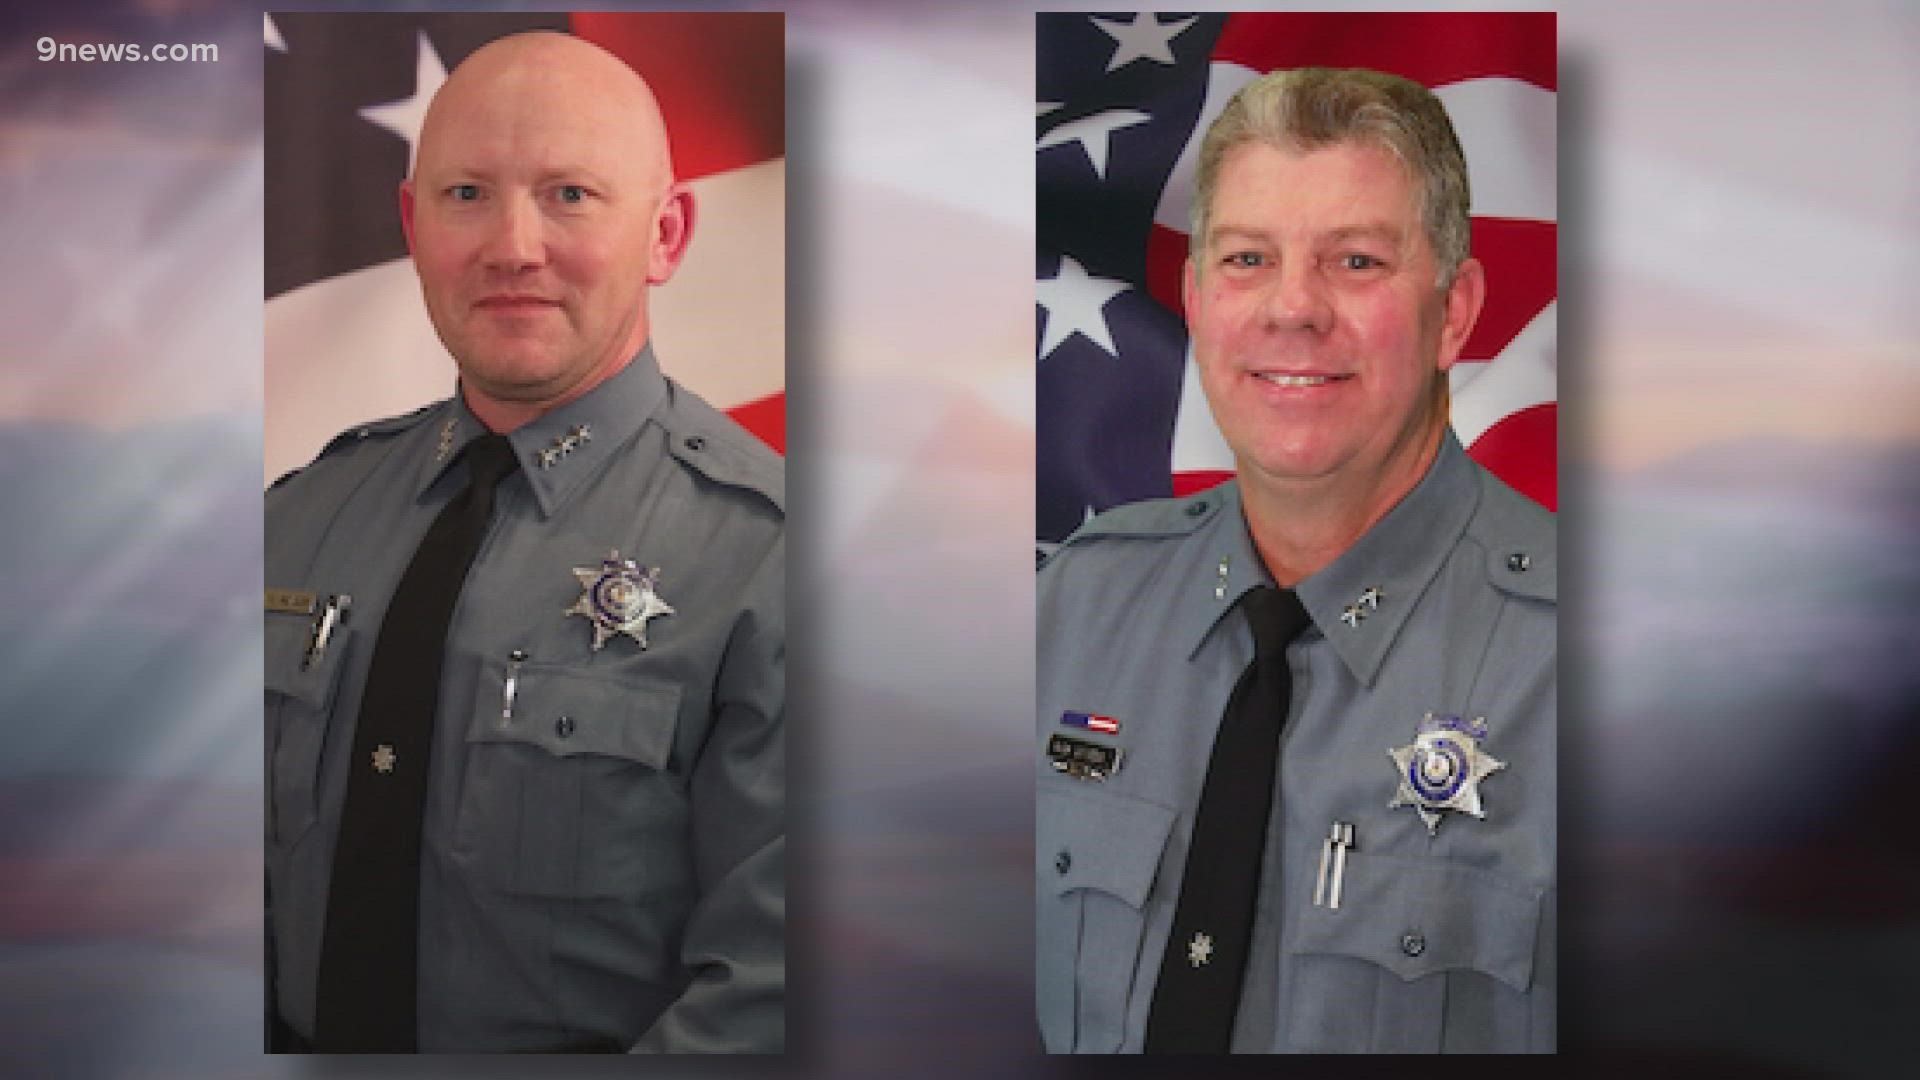 The Undersheriff and Training Division Chief are on administrative leave. The Jail Division Chief is on active duty amid an active trespassing investigation.